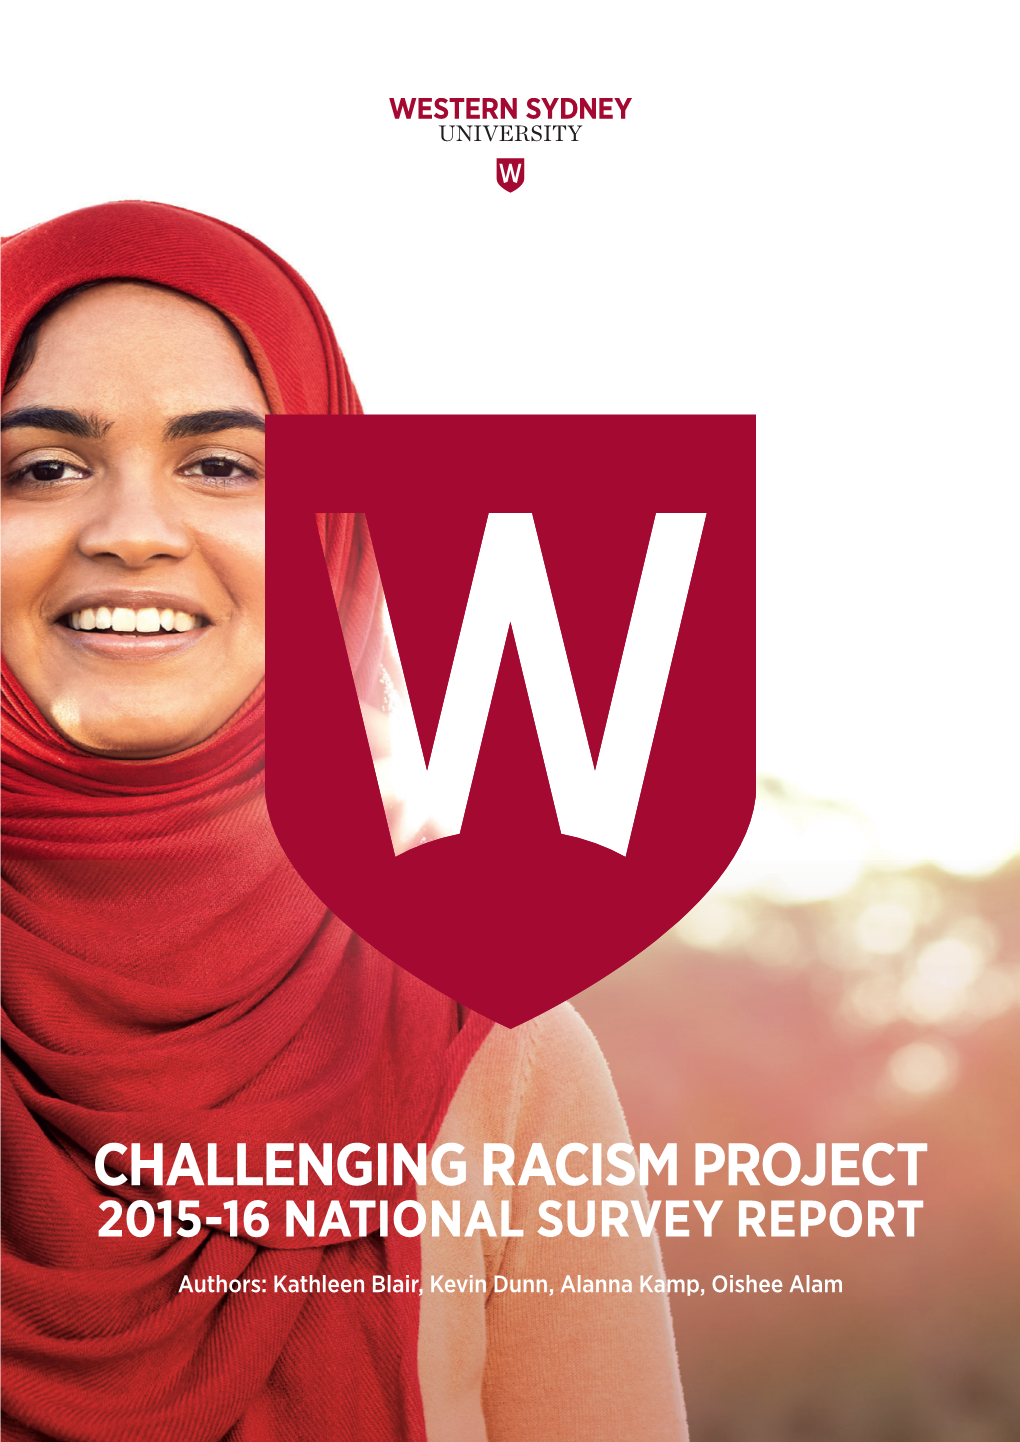 Challenging Racism Project 2015-16 National Survey Report